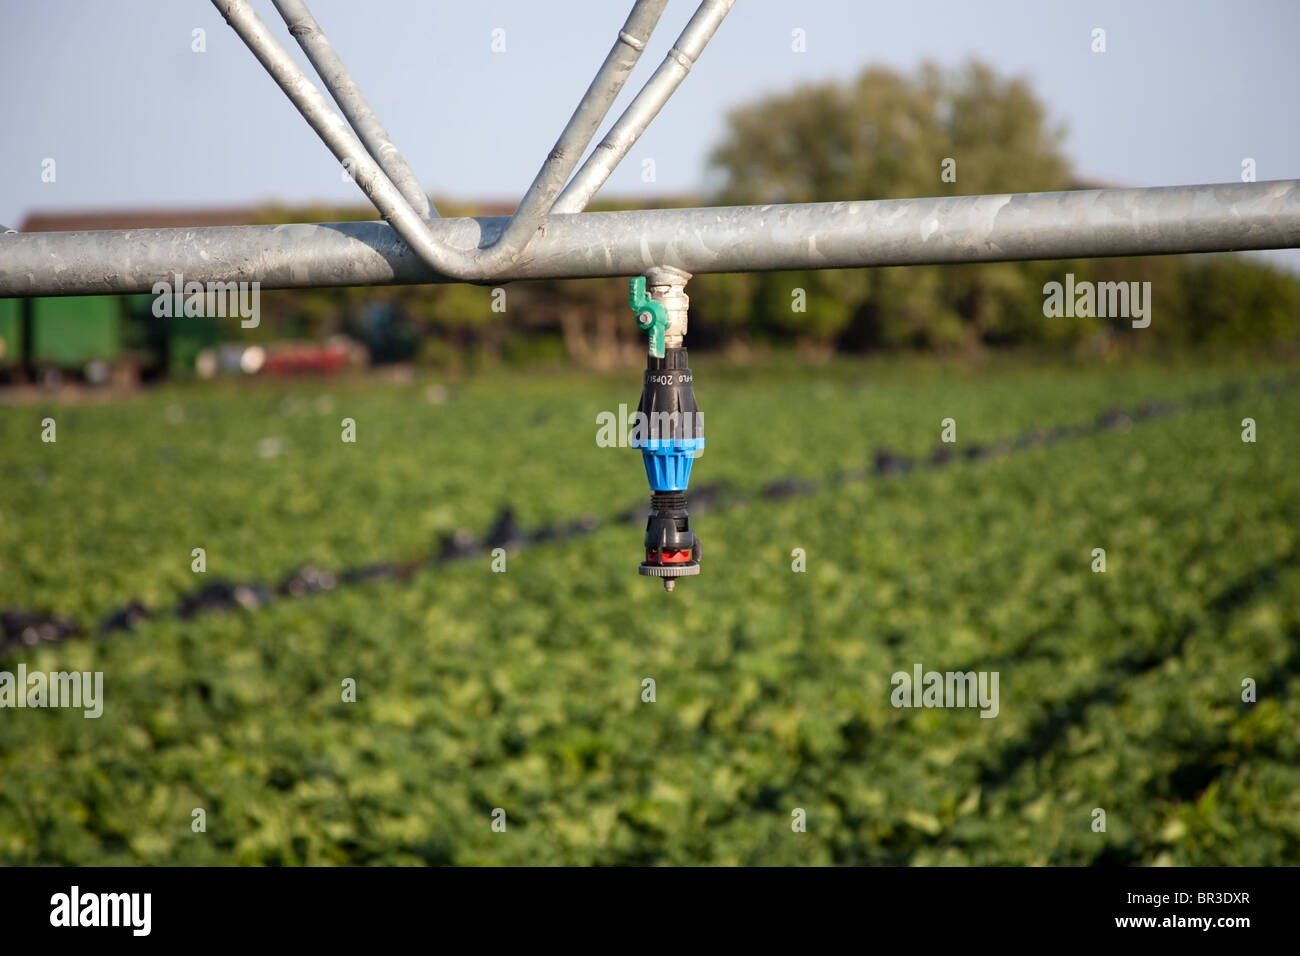 Sprinkler Irrigation Pipes And Systems And Machines For Market